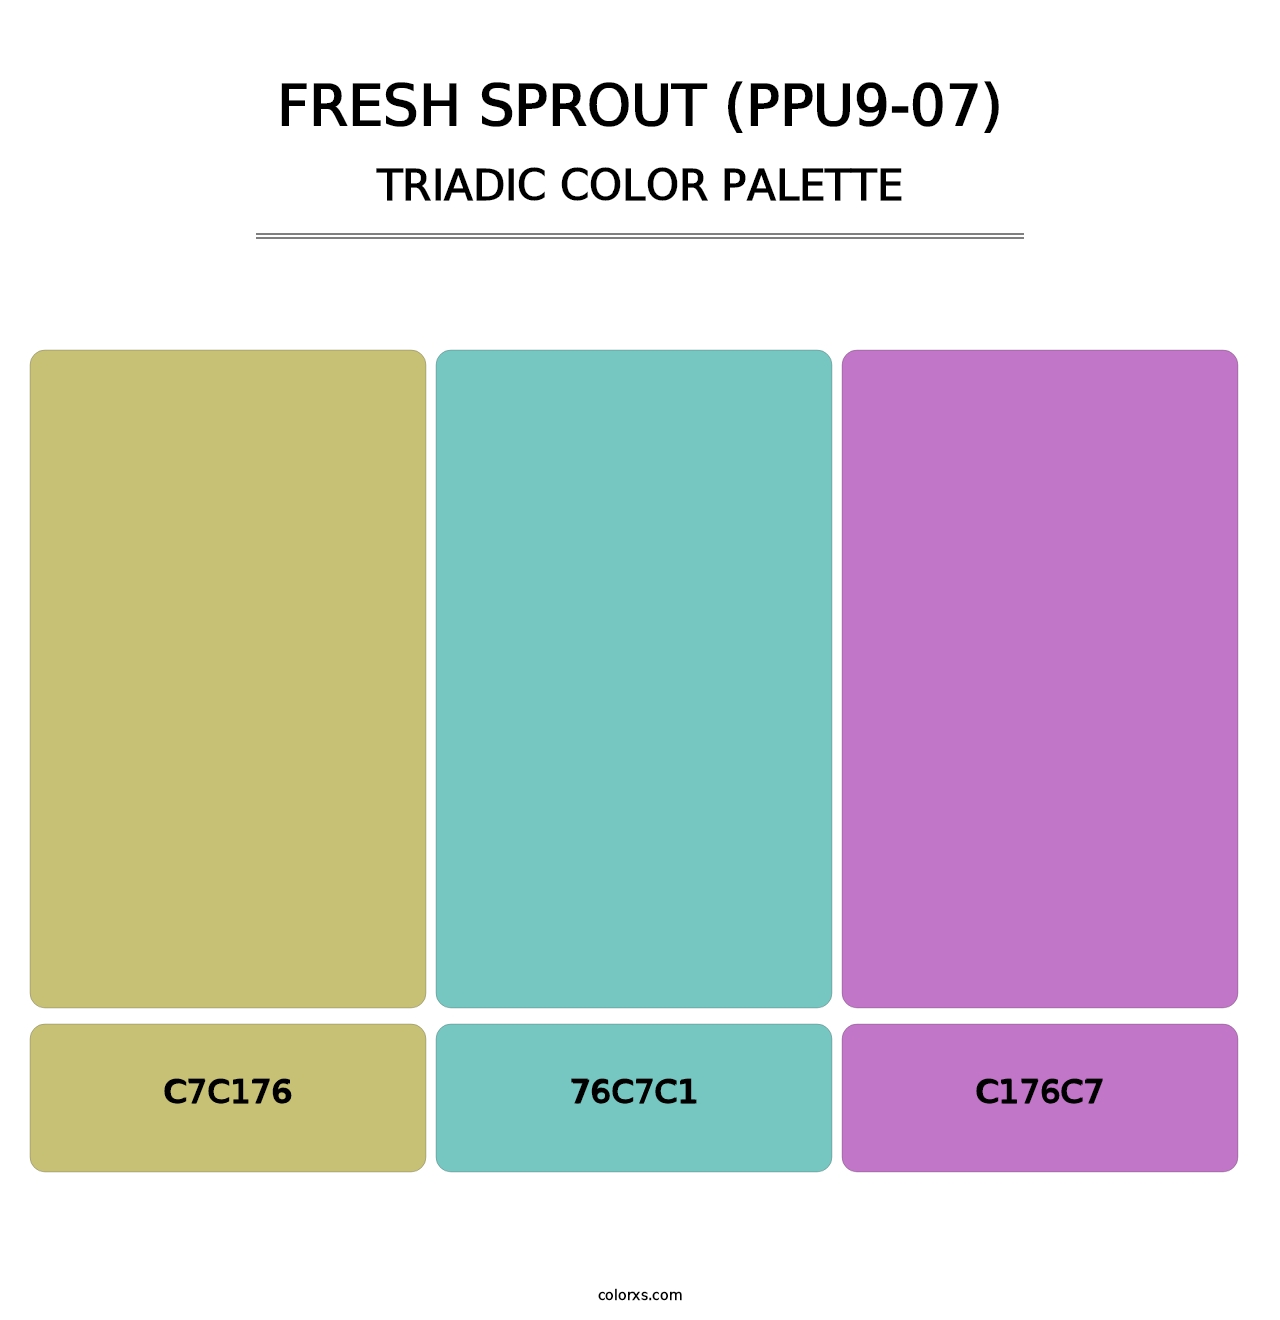 Fresh Sprout (PPU9-07) - Triadic Color Palette